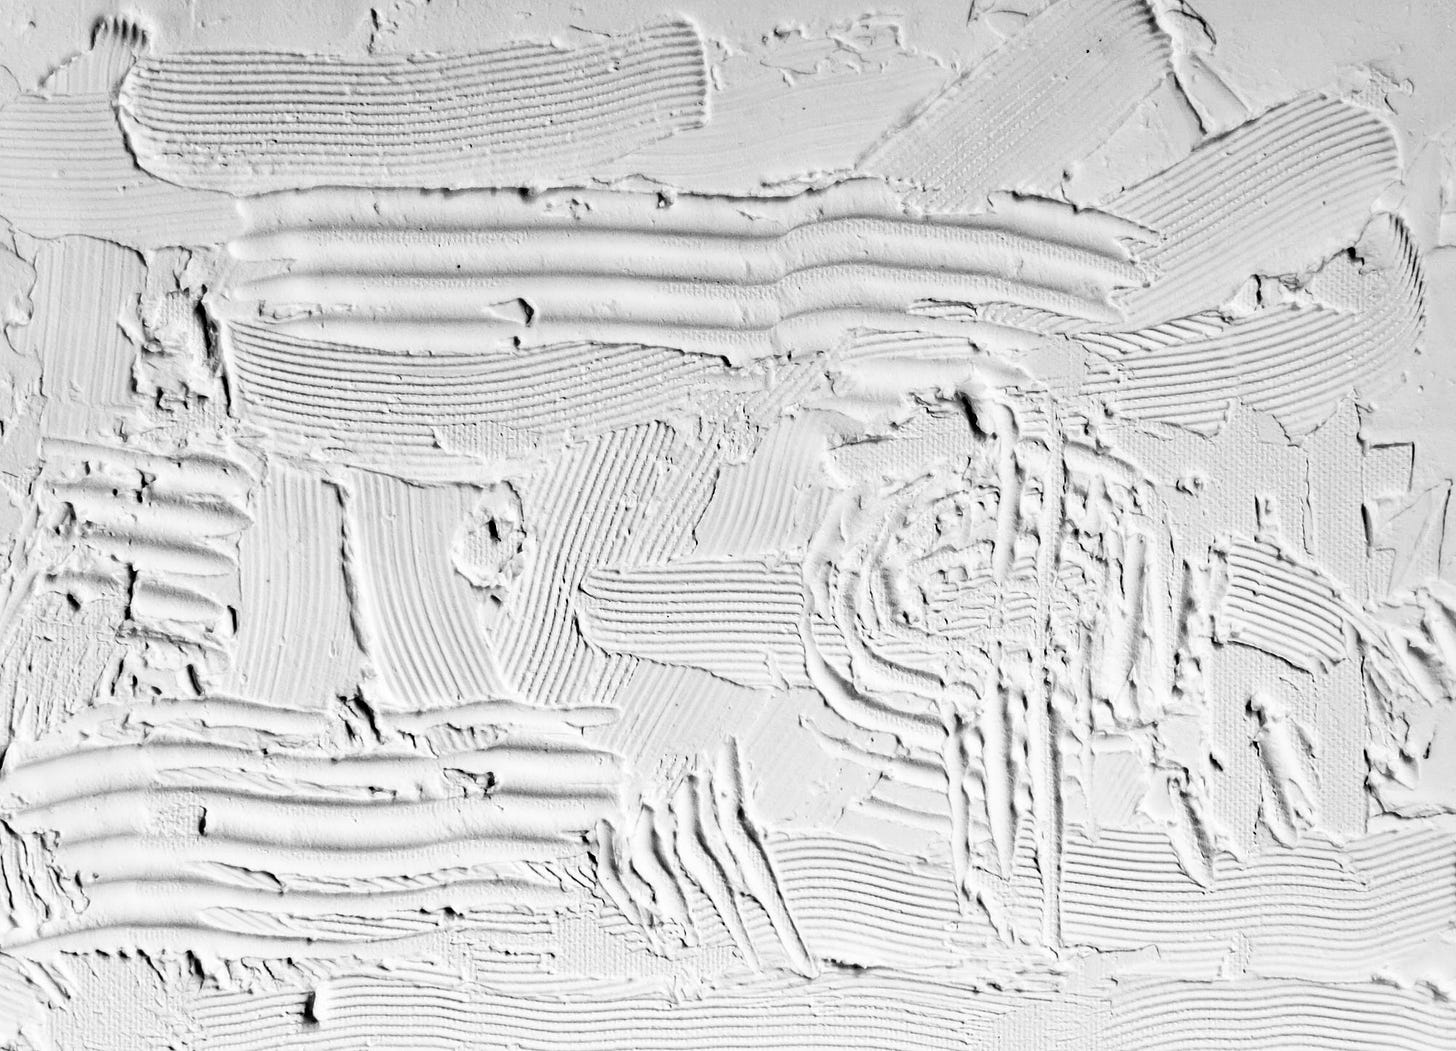 Photo of texture in white plaster by Steve Johnson from Pexels